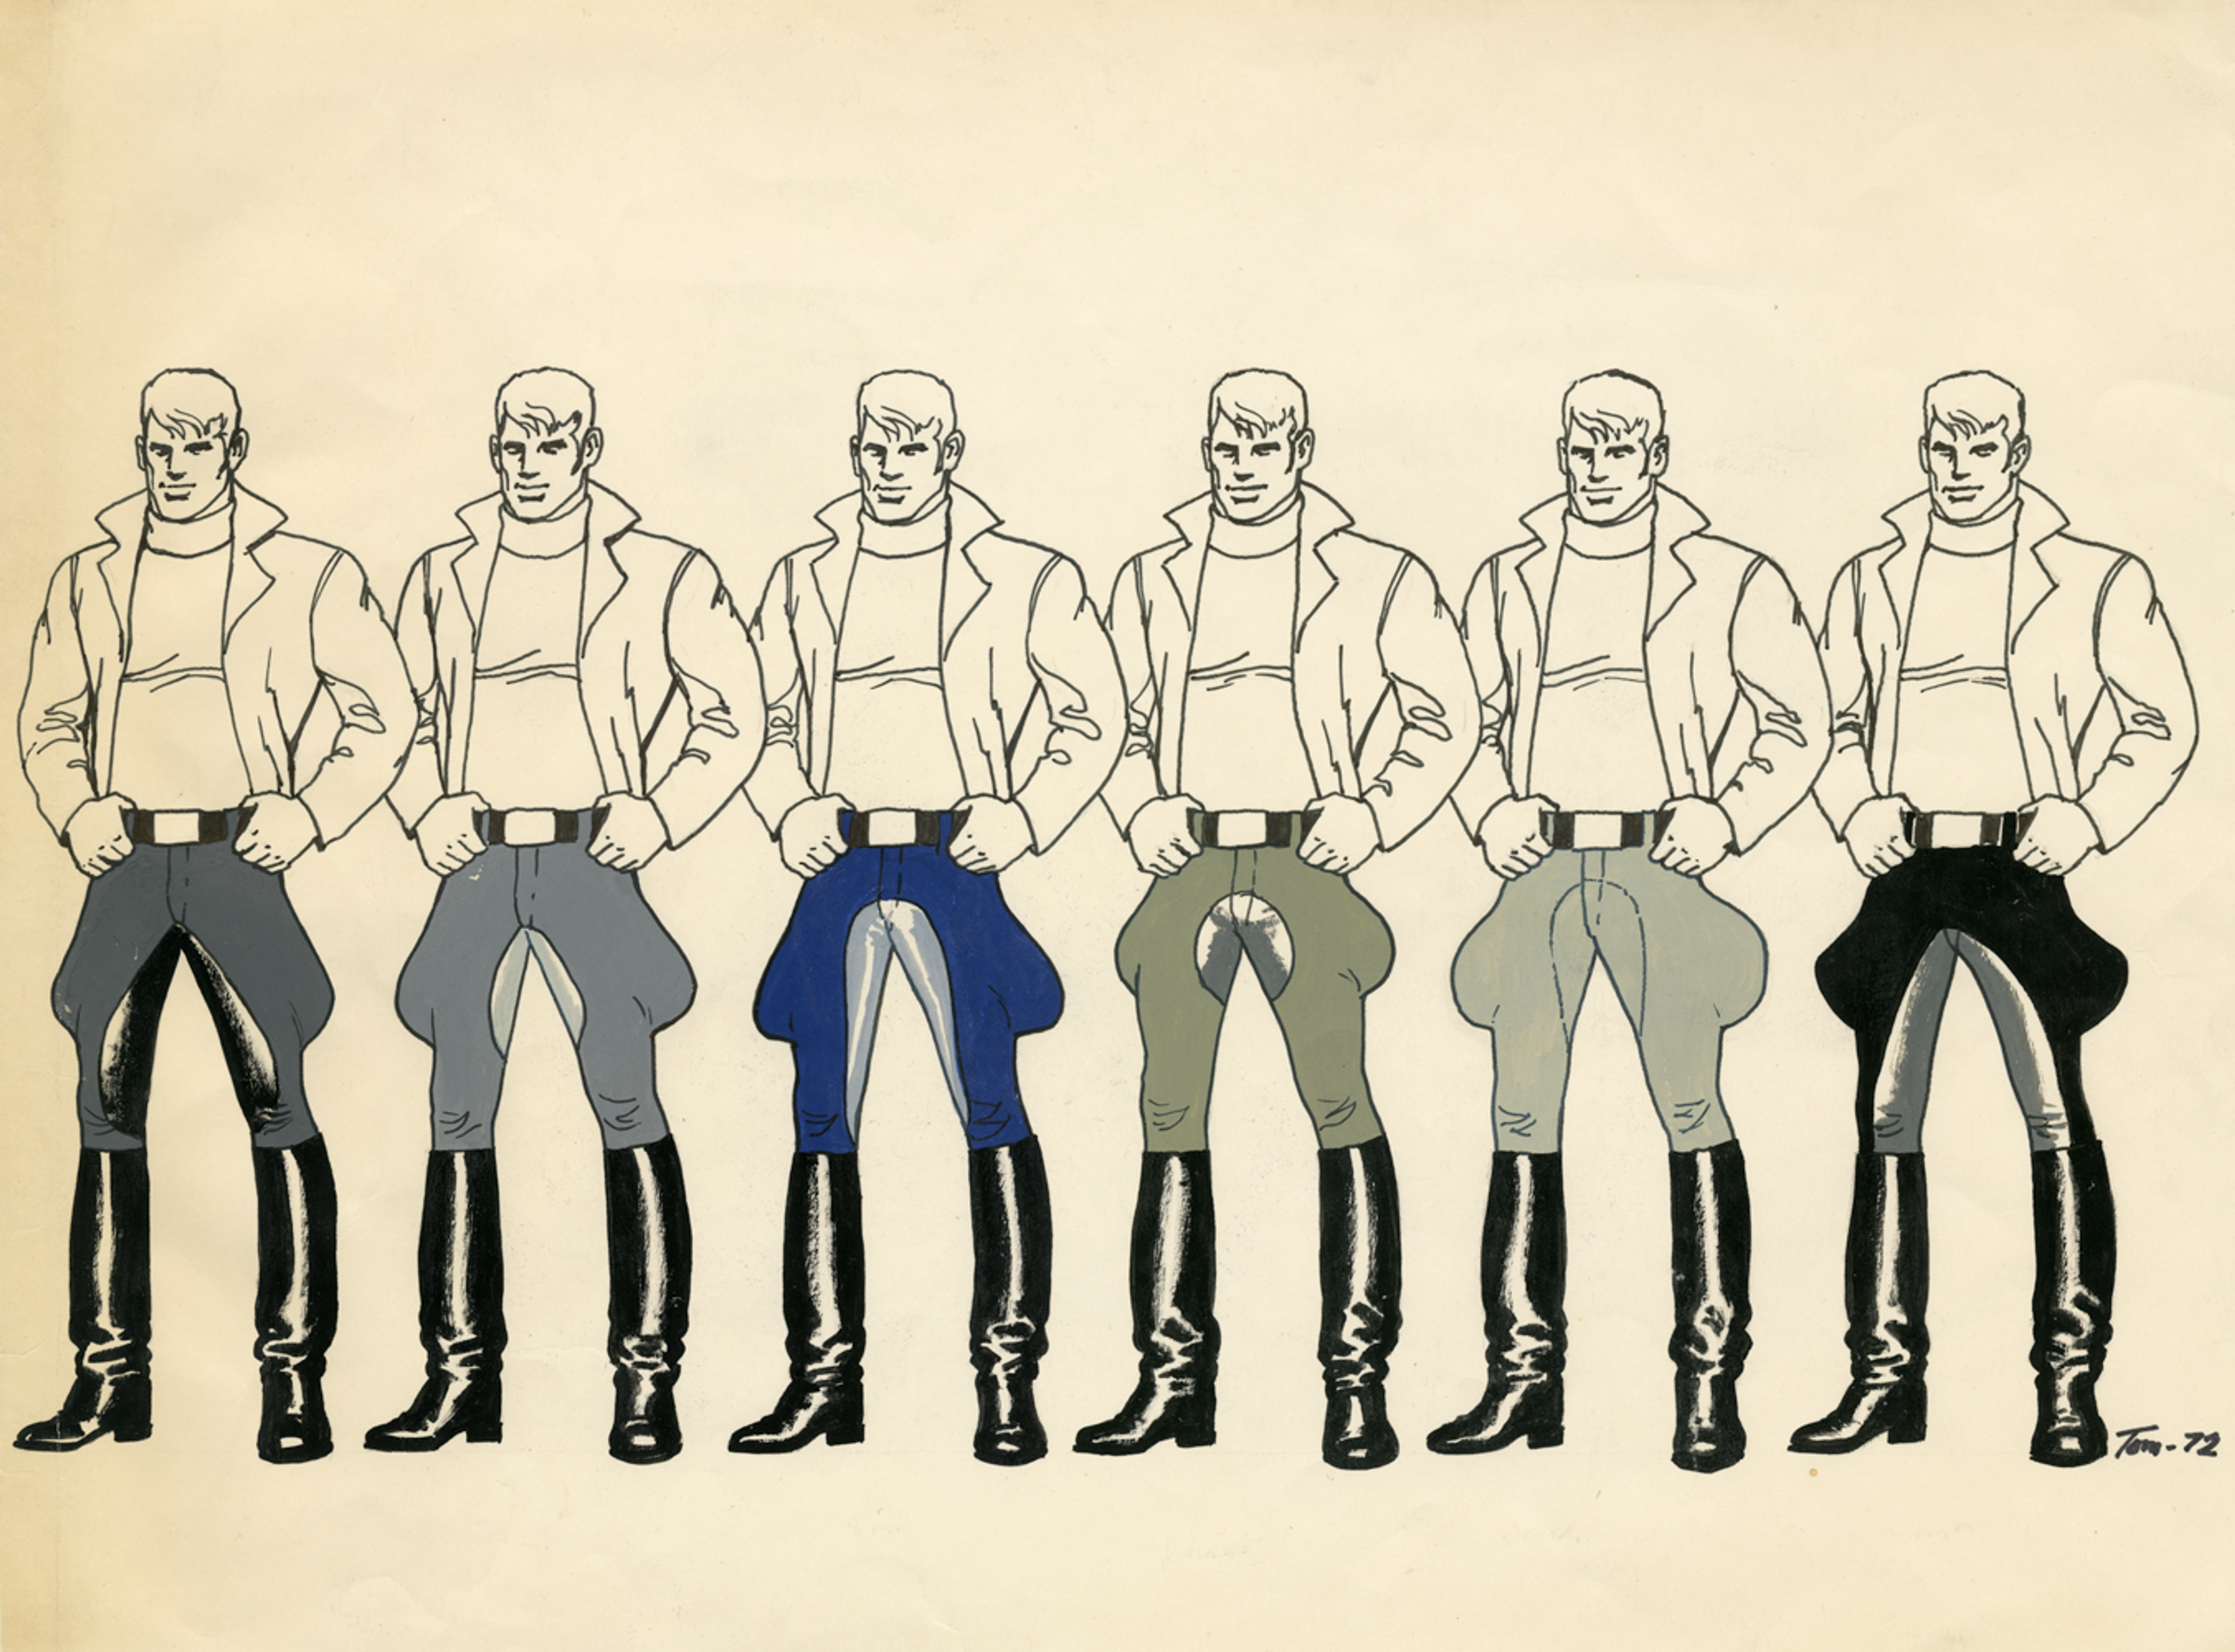 Illustration of six identical men standing in a row, each with different coloured trousers